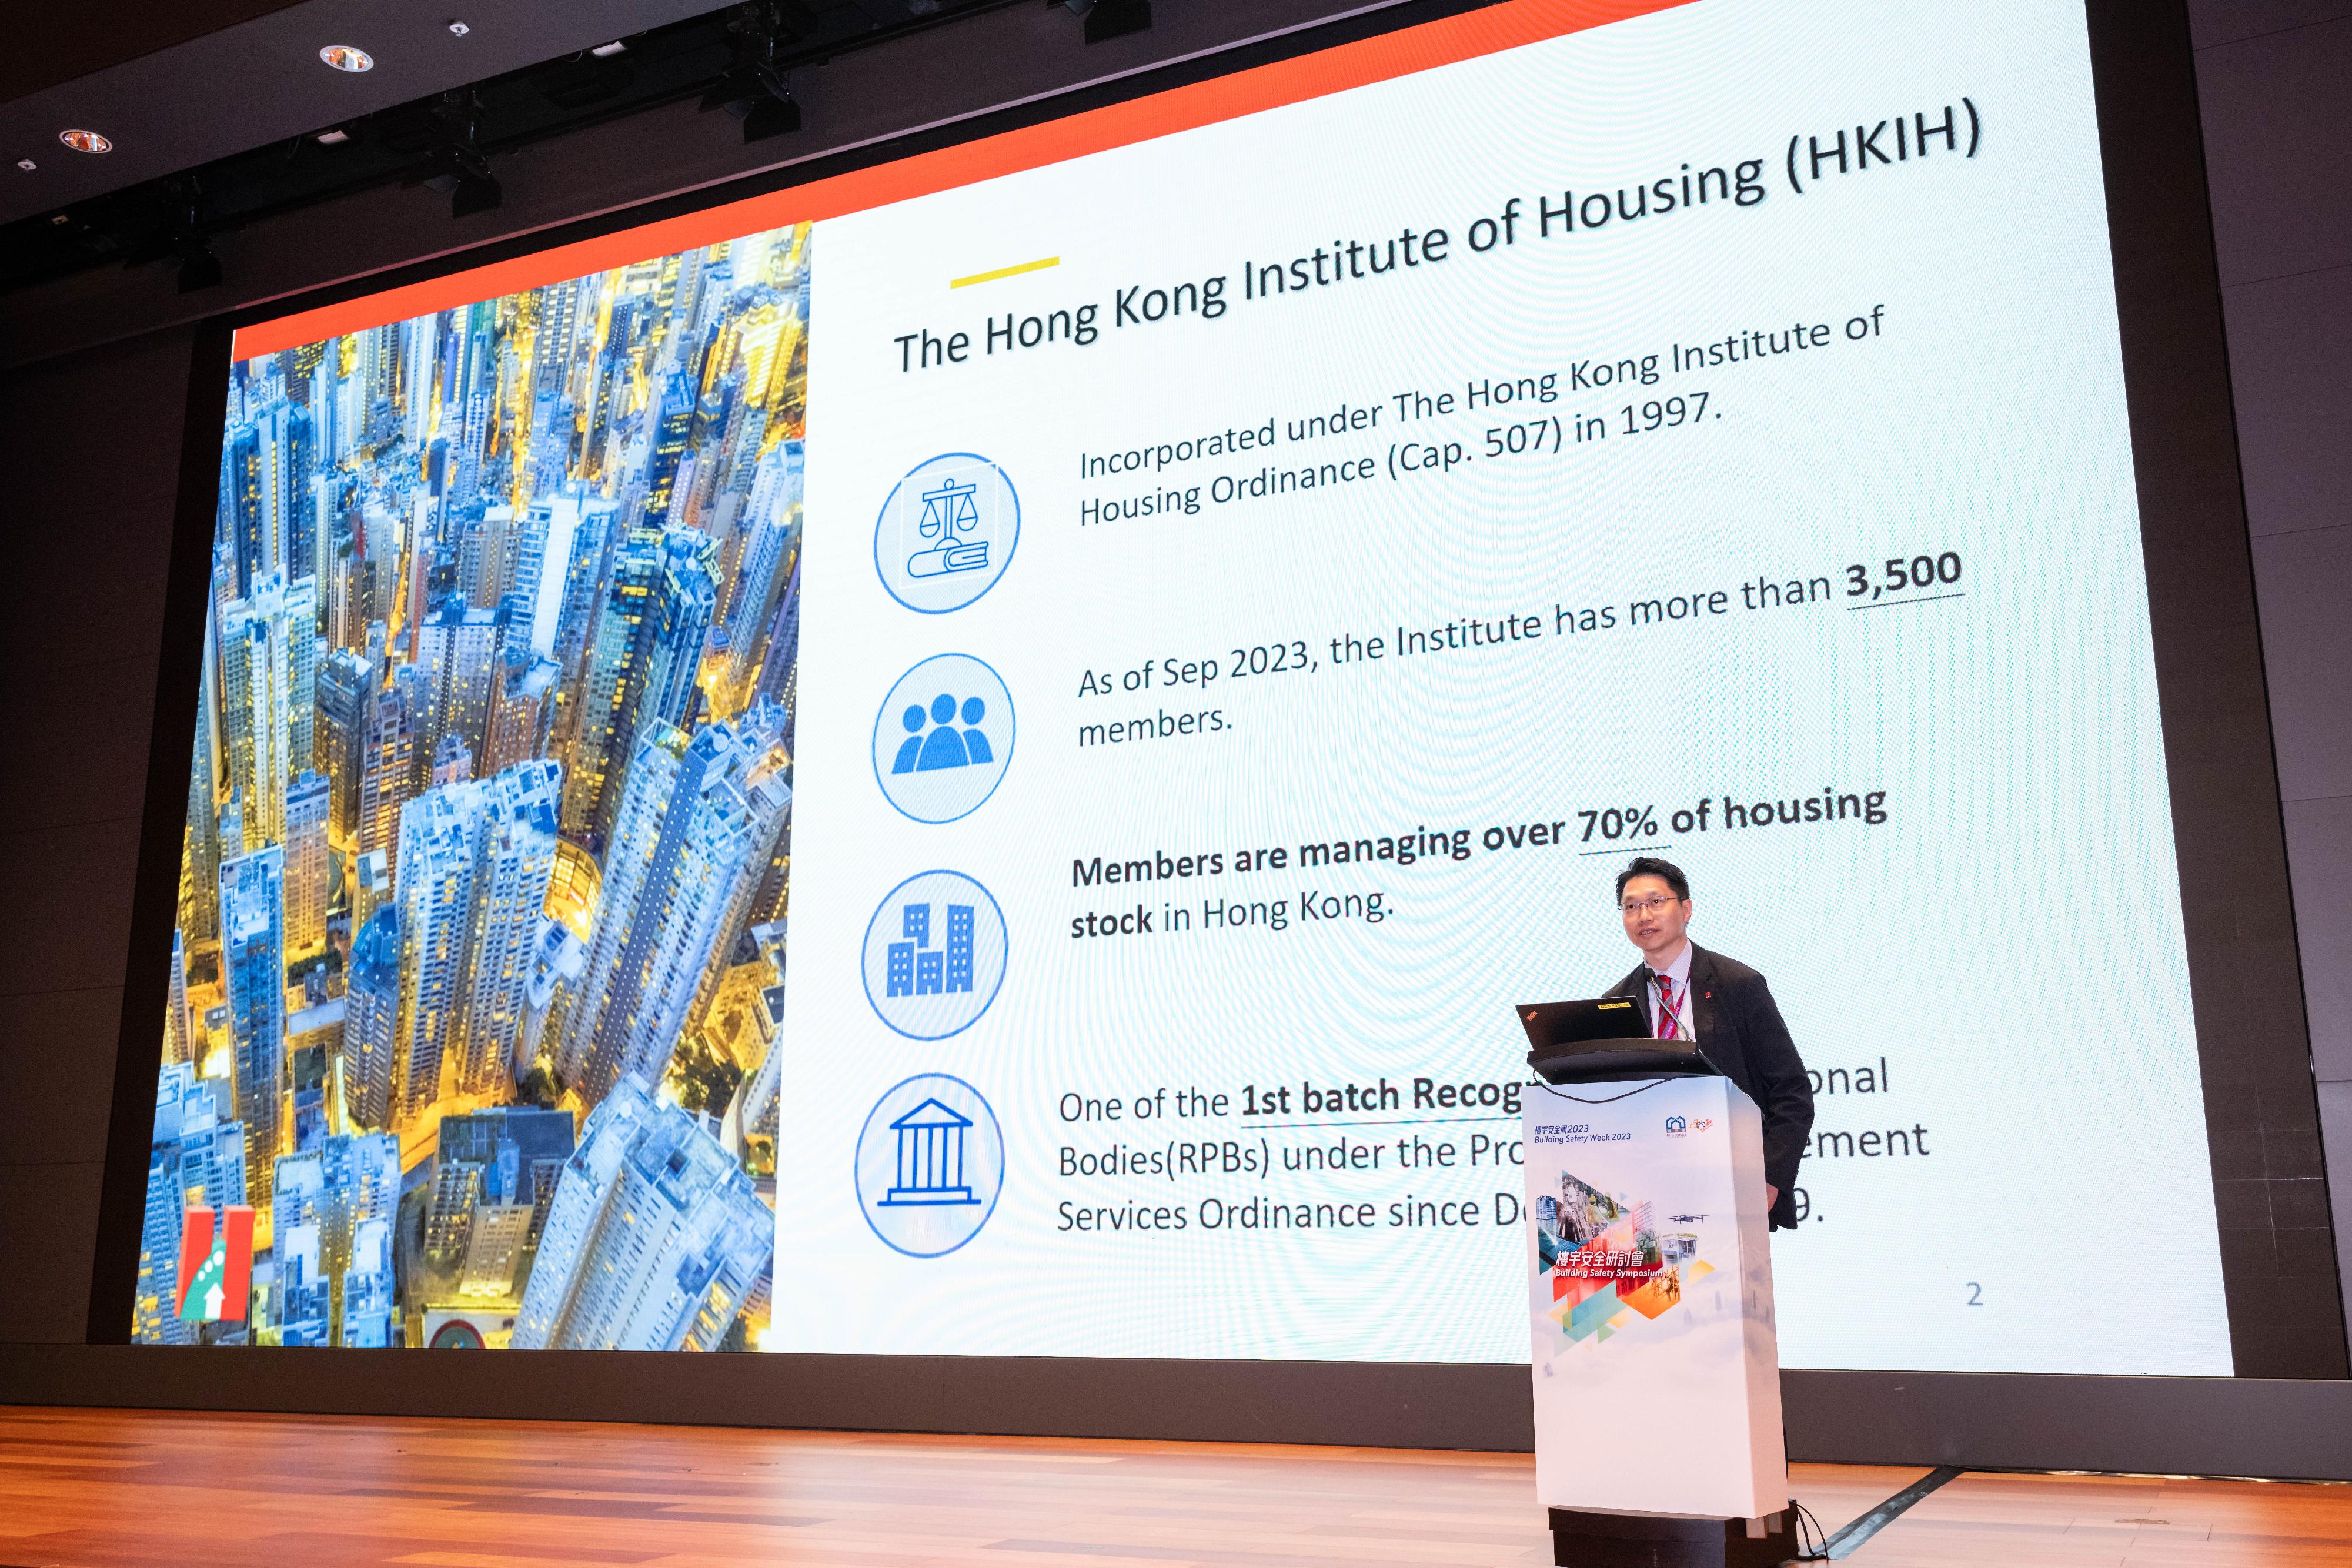 The Buildings Department held the closing event of Building Safety Week 2023, the Building Safety Symposium, at the Hong Kong Palace Museum today (October 27). Photo shows the Chairman of the Professional Practice Committee, the Hong Kong Institute of Housing, Mr Lewis Lam, speaking at the symposium on Innovation to Enhance Quality, Efficiency and Cost-effectiveness in Building Management and Maintenance.